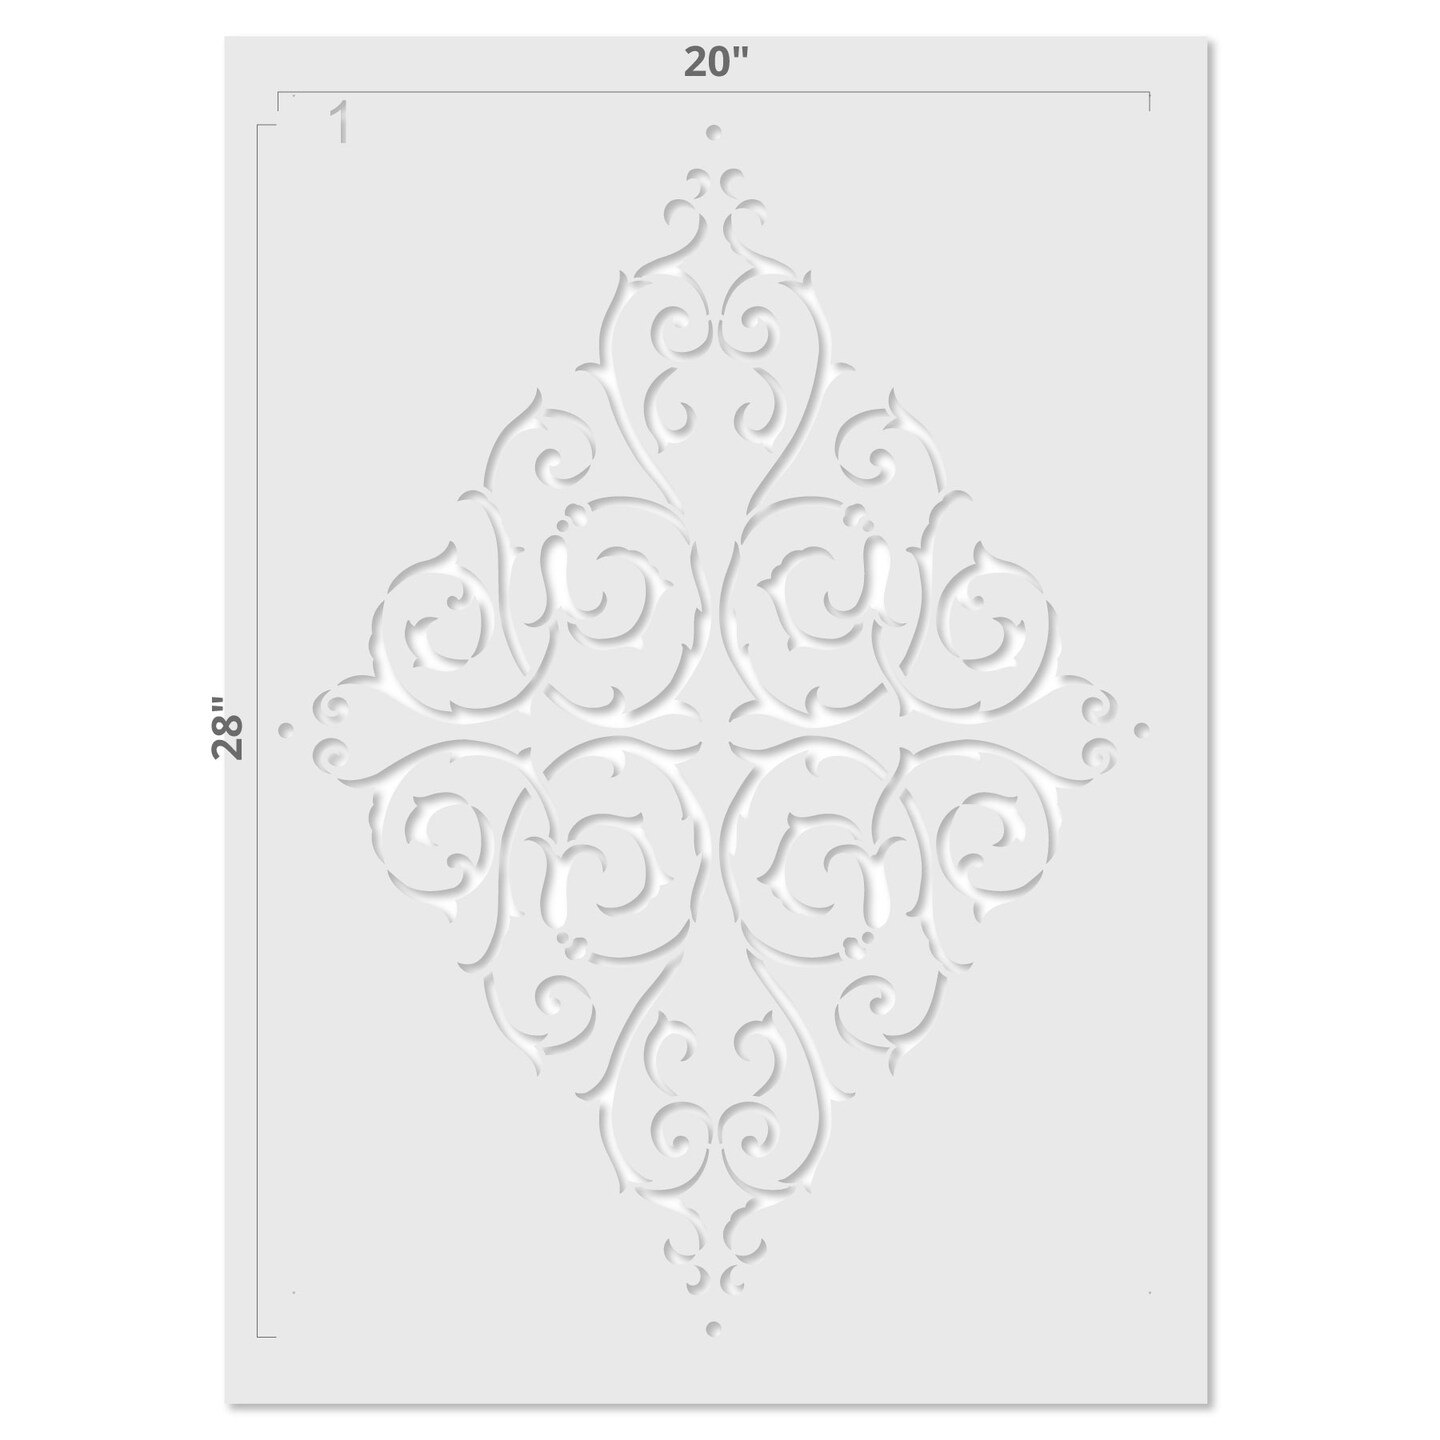 Large French Medallion Wall Stencil | 3474 by Designer Stencils | Mandala &#x26; Medallion Stencils | Reusable Art Craft Stencils for Painting on Walls, Canvas, Wood | Reusable Plastic Paint Stencil for Home Makeover | Easy to Use &#x26; Clean Art Stencil